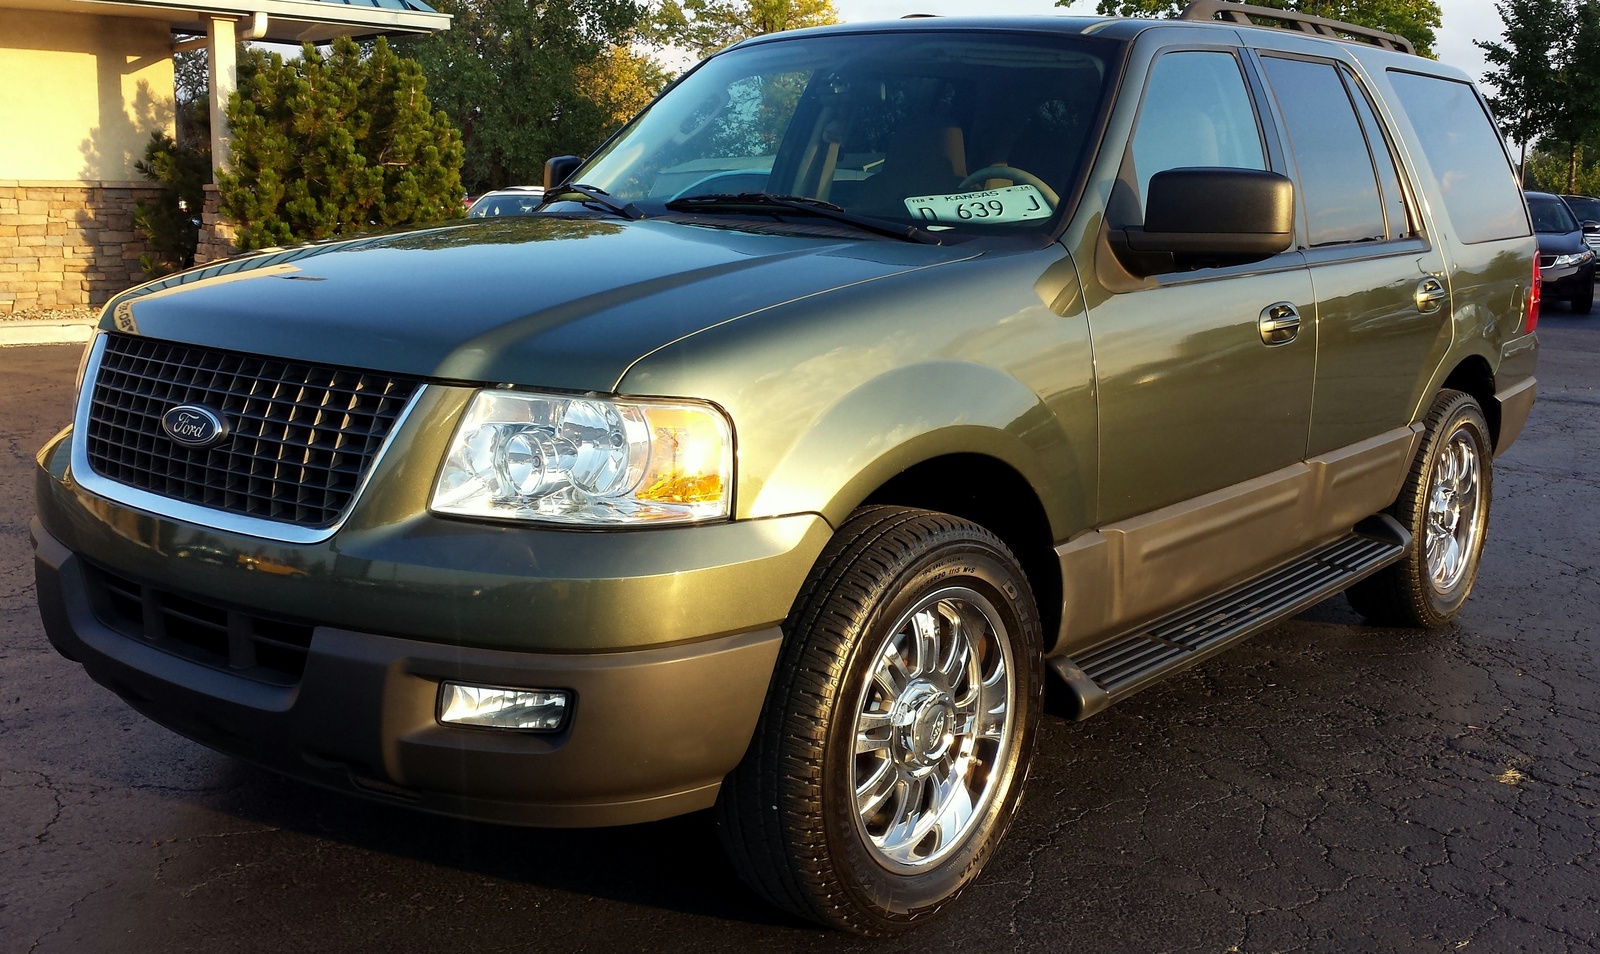 2006 Ford expedition xlt review #1